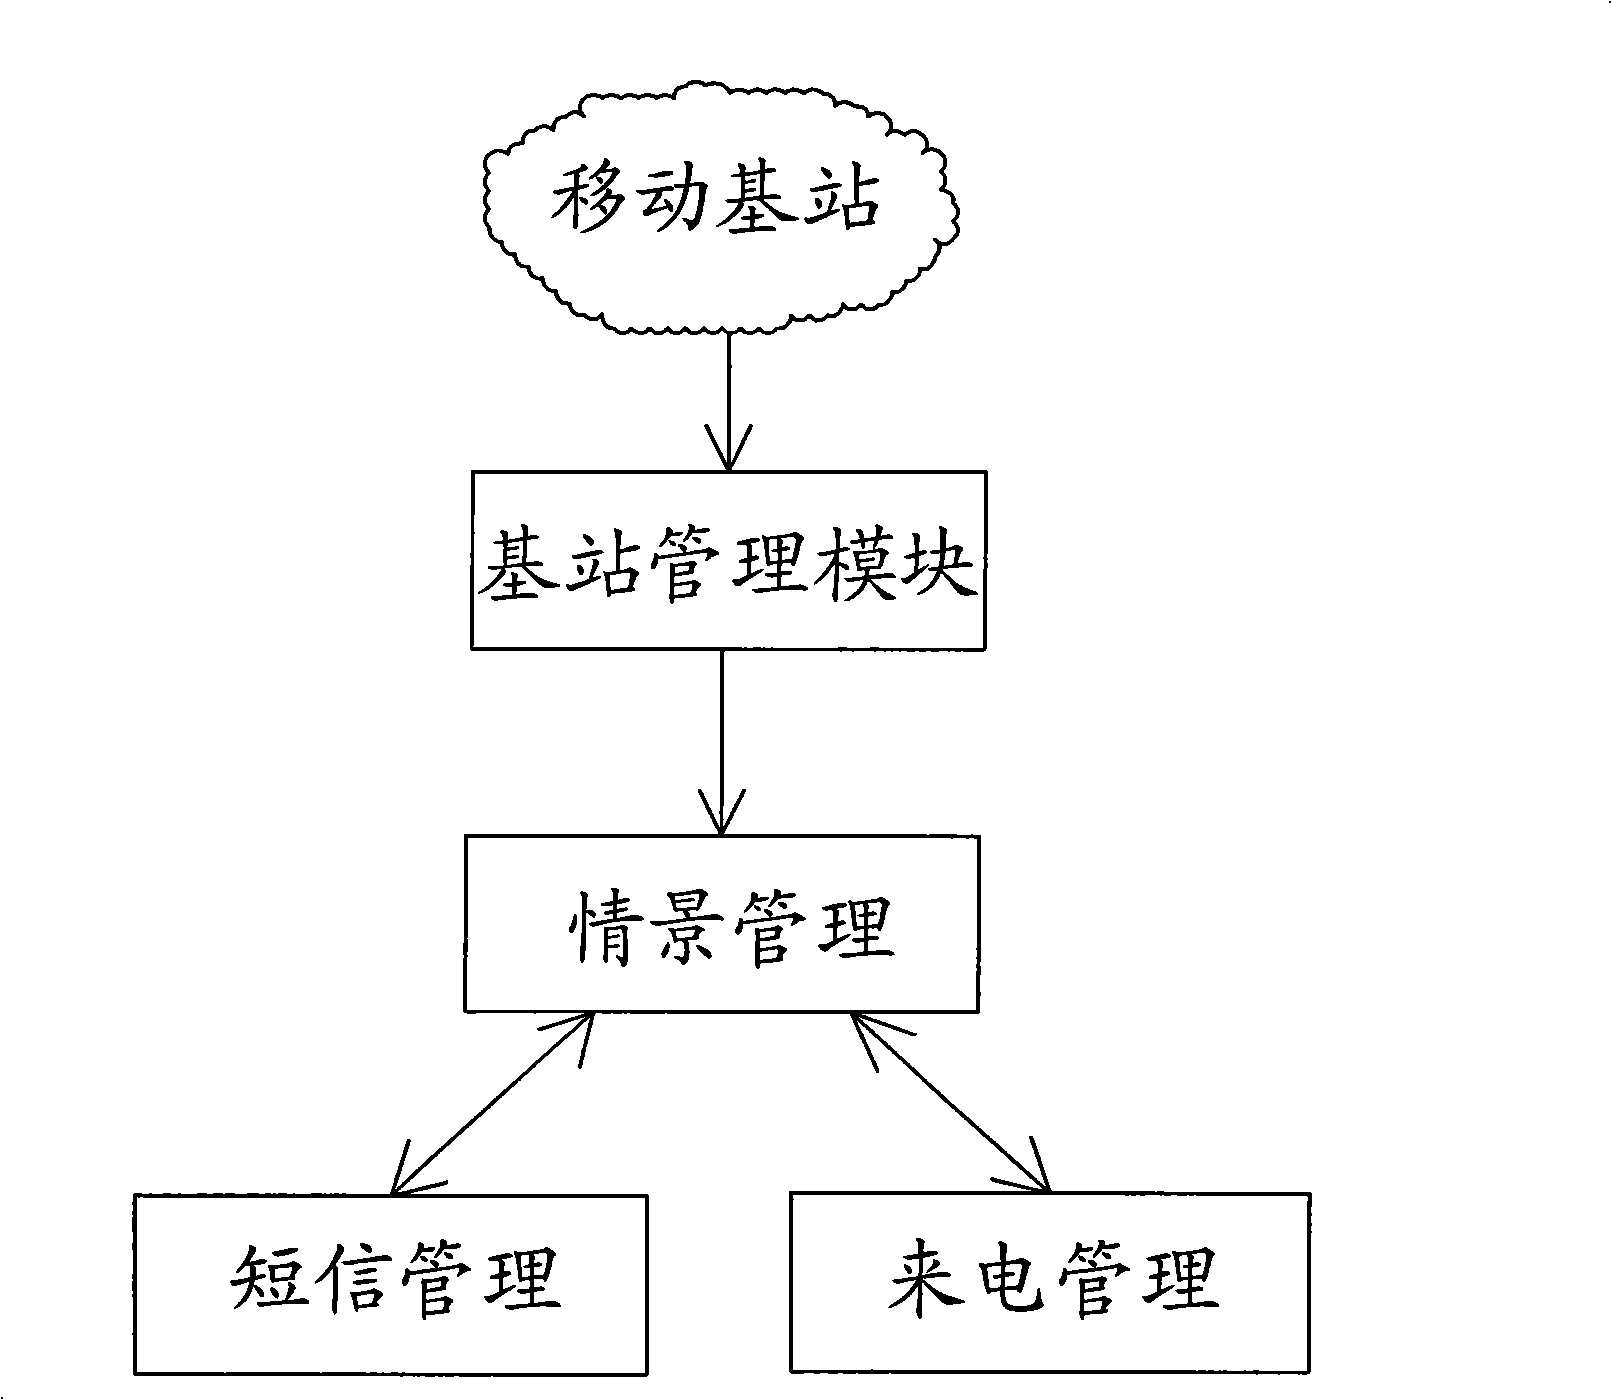 Method and system for switching situation based on base station binding